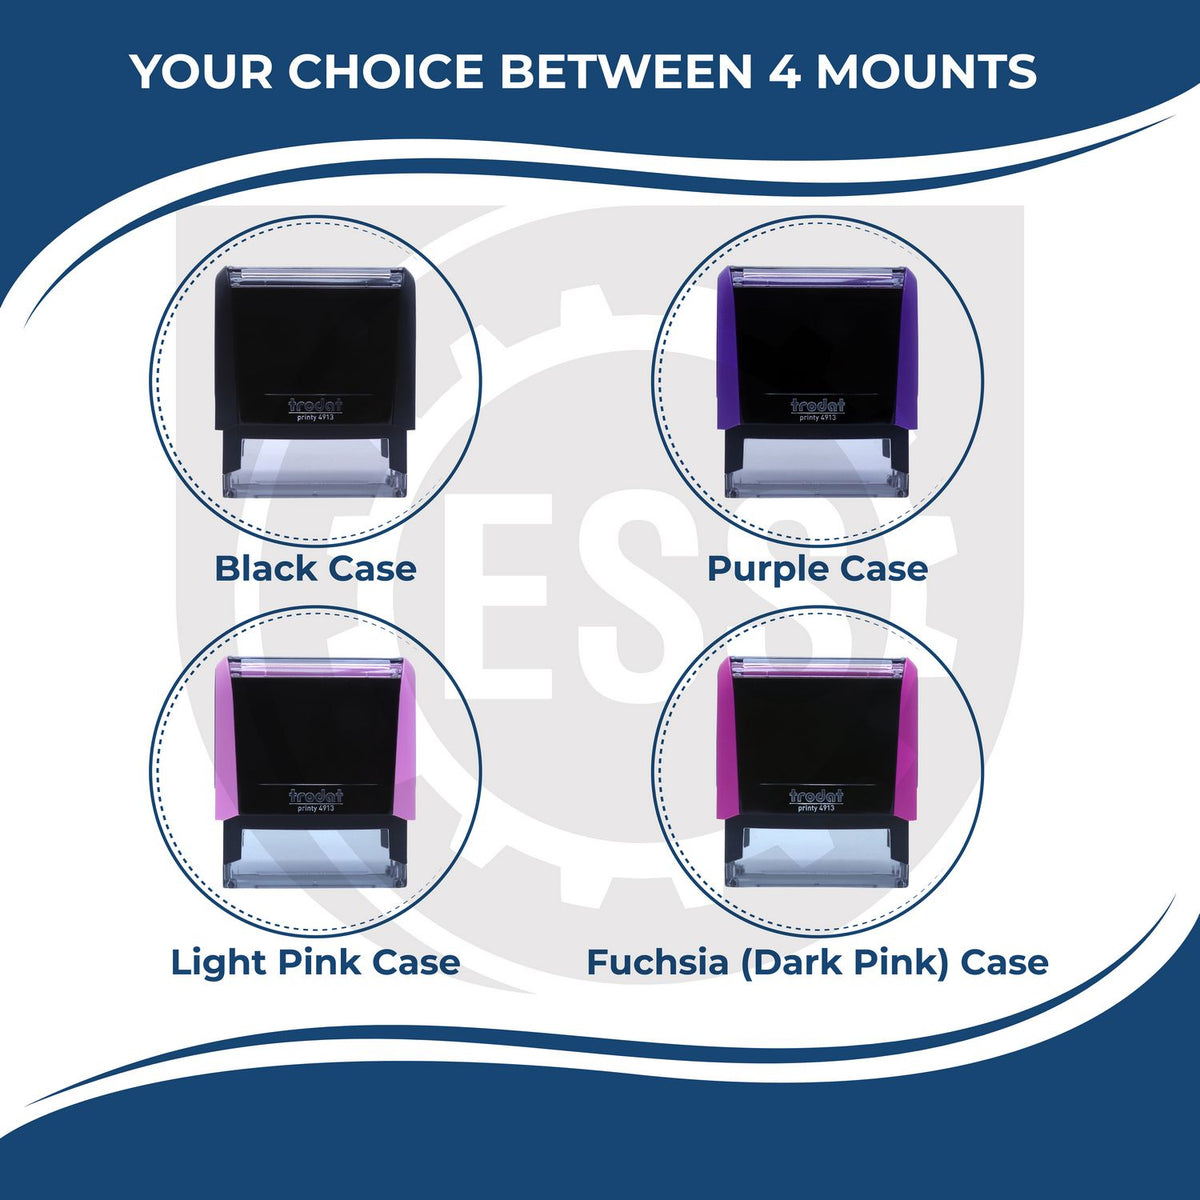 A picture of different colored mounts for the Self-Inking State Seal New Hampshire Notary Stamp featurning a Red, Blue or Black Mount